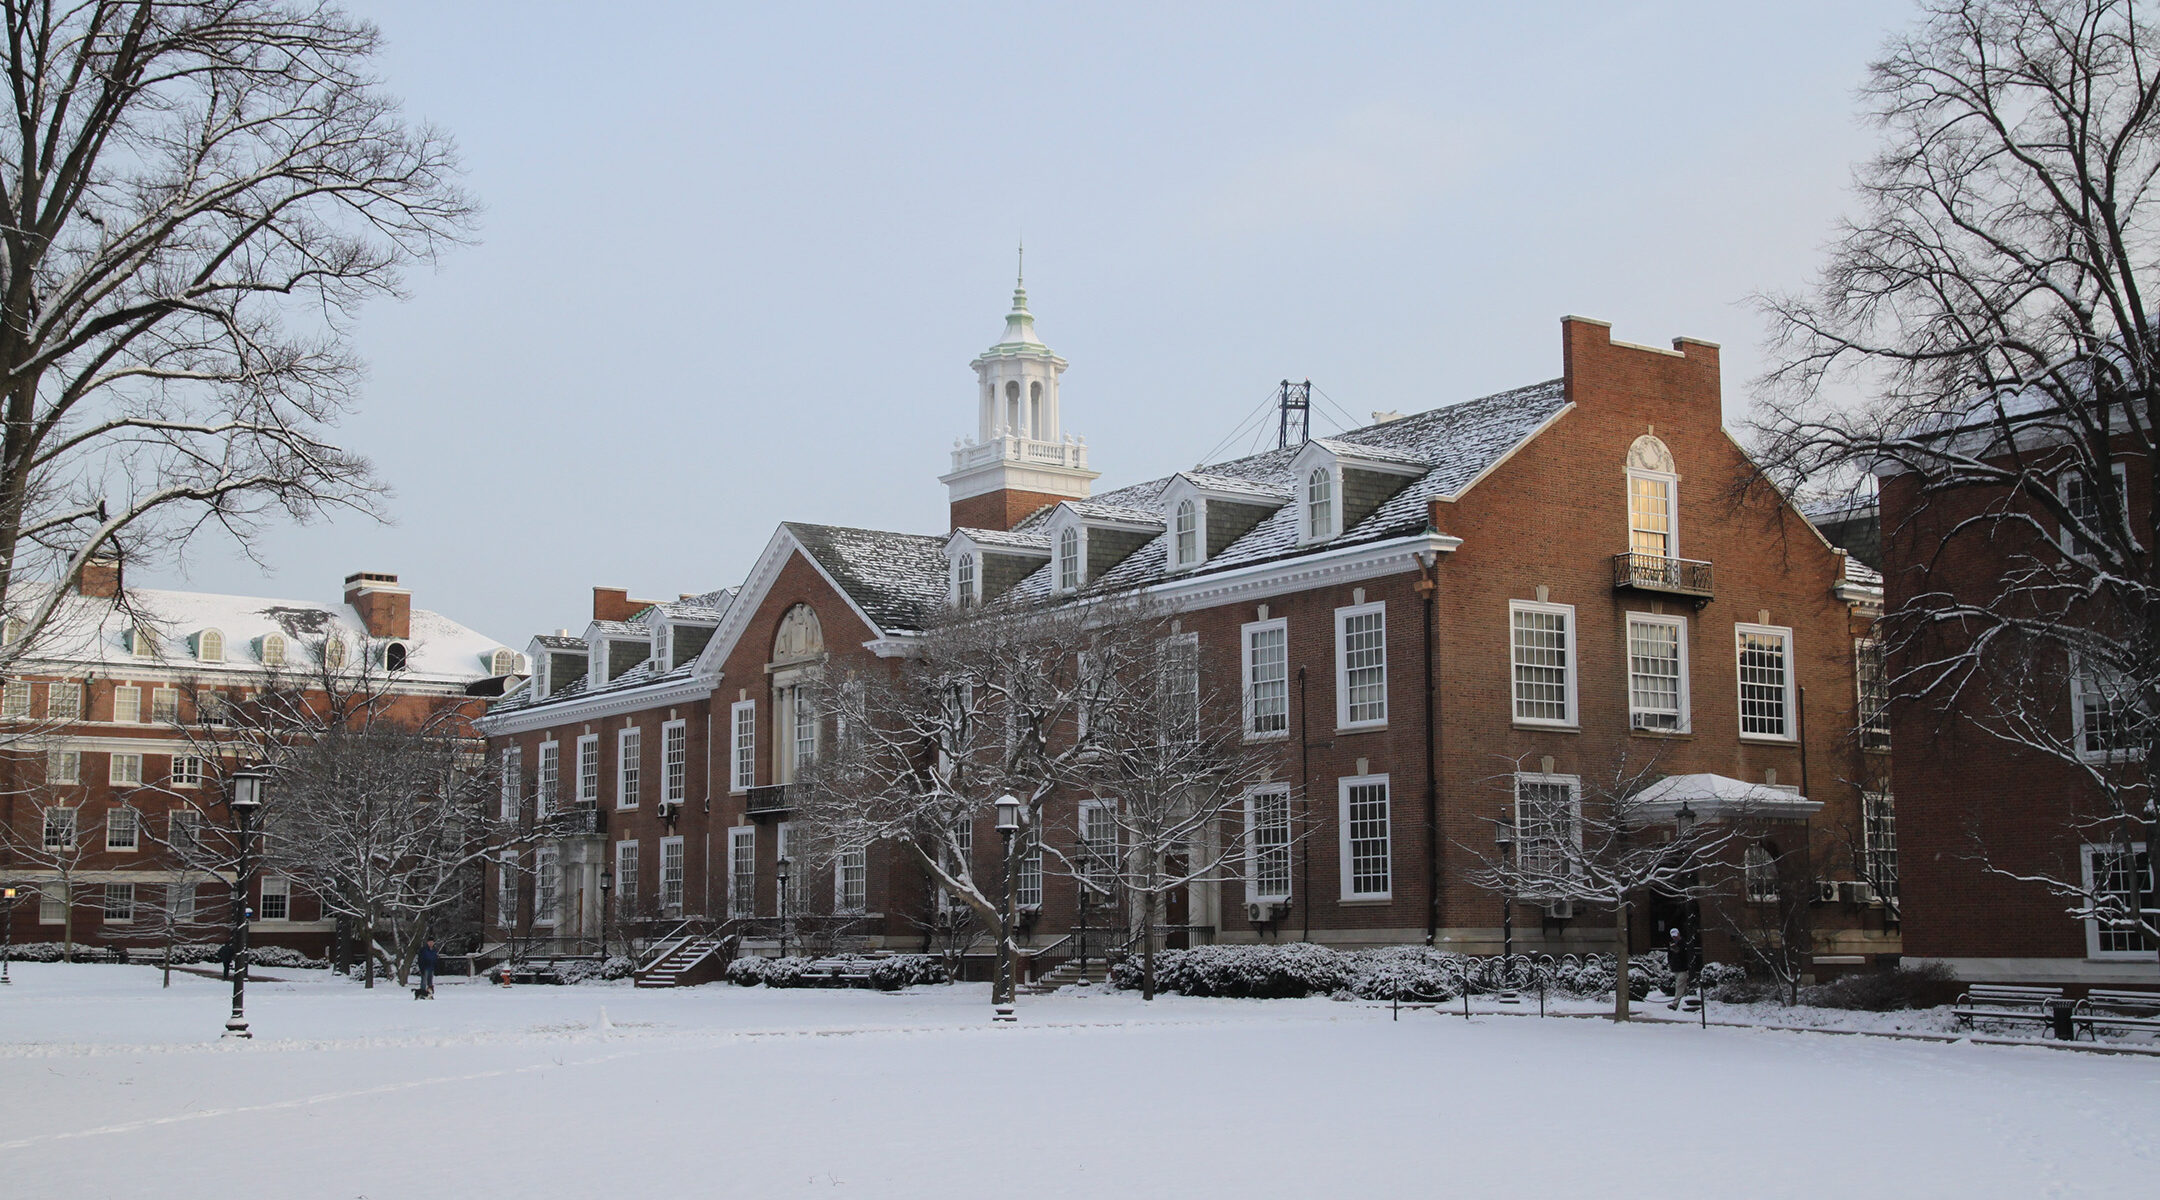 The Maryland Hall at Johns Hopkins University in Baltimore, Maryland on Jan. 12, 2011. (Wikimedia Commons)